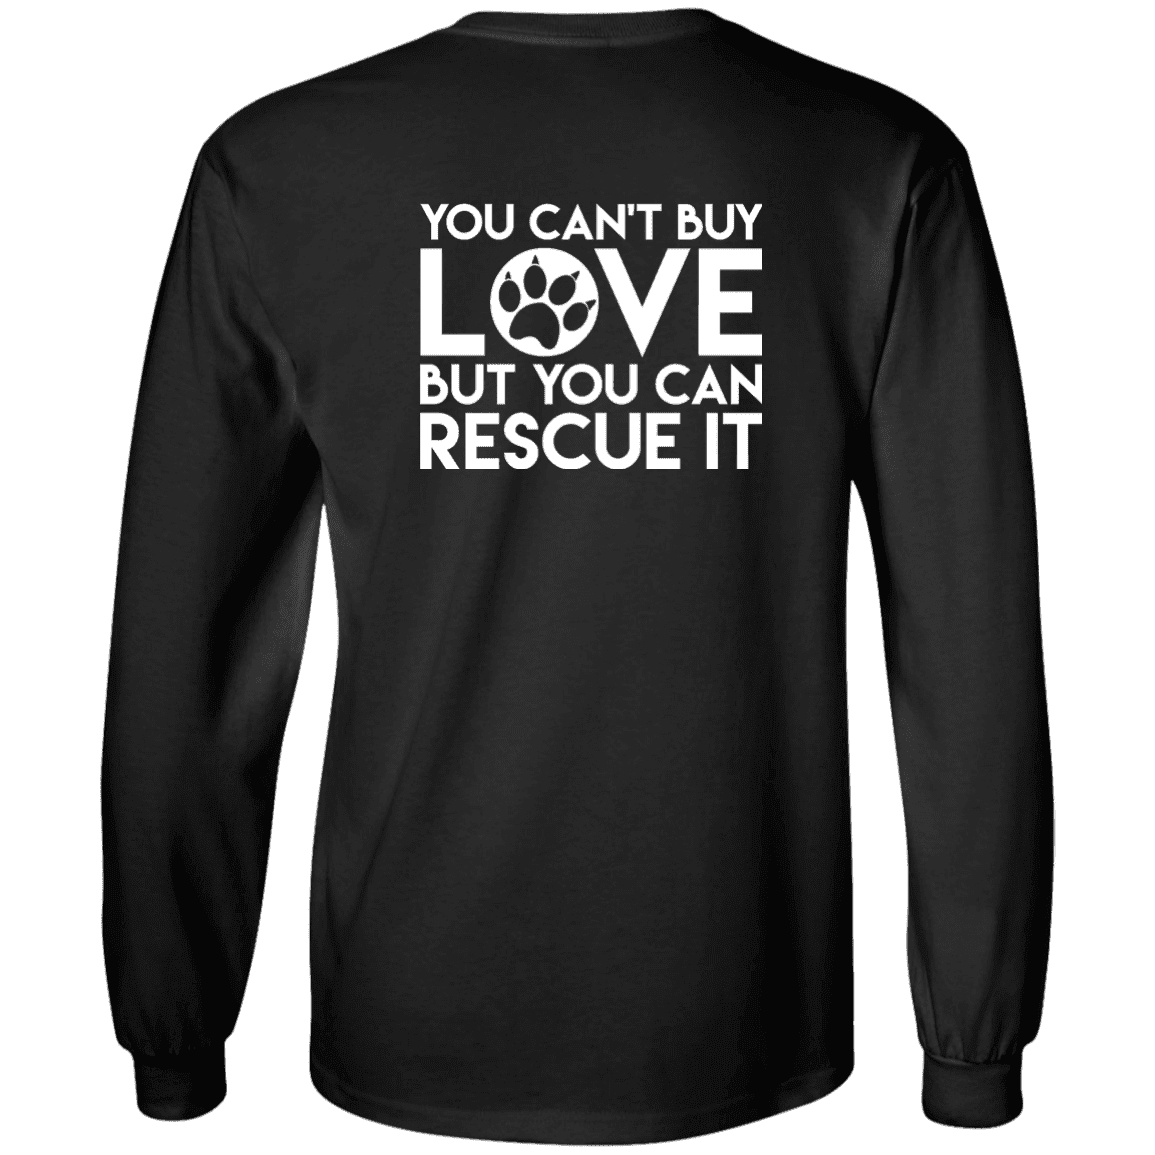 You Can't Buy Love - Long Sleeve T Shirt.